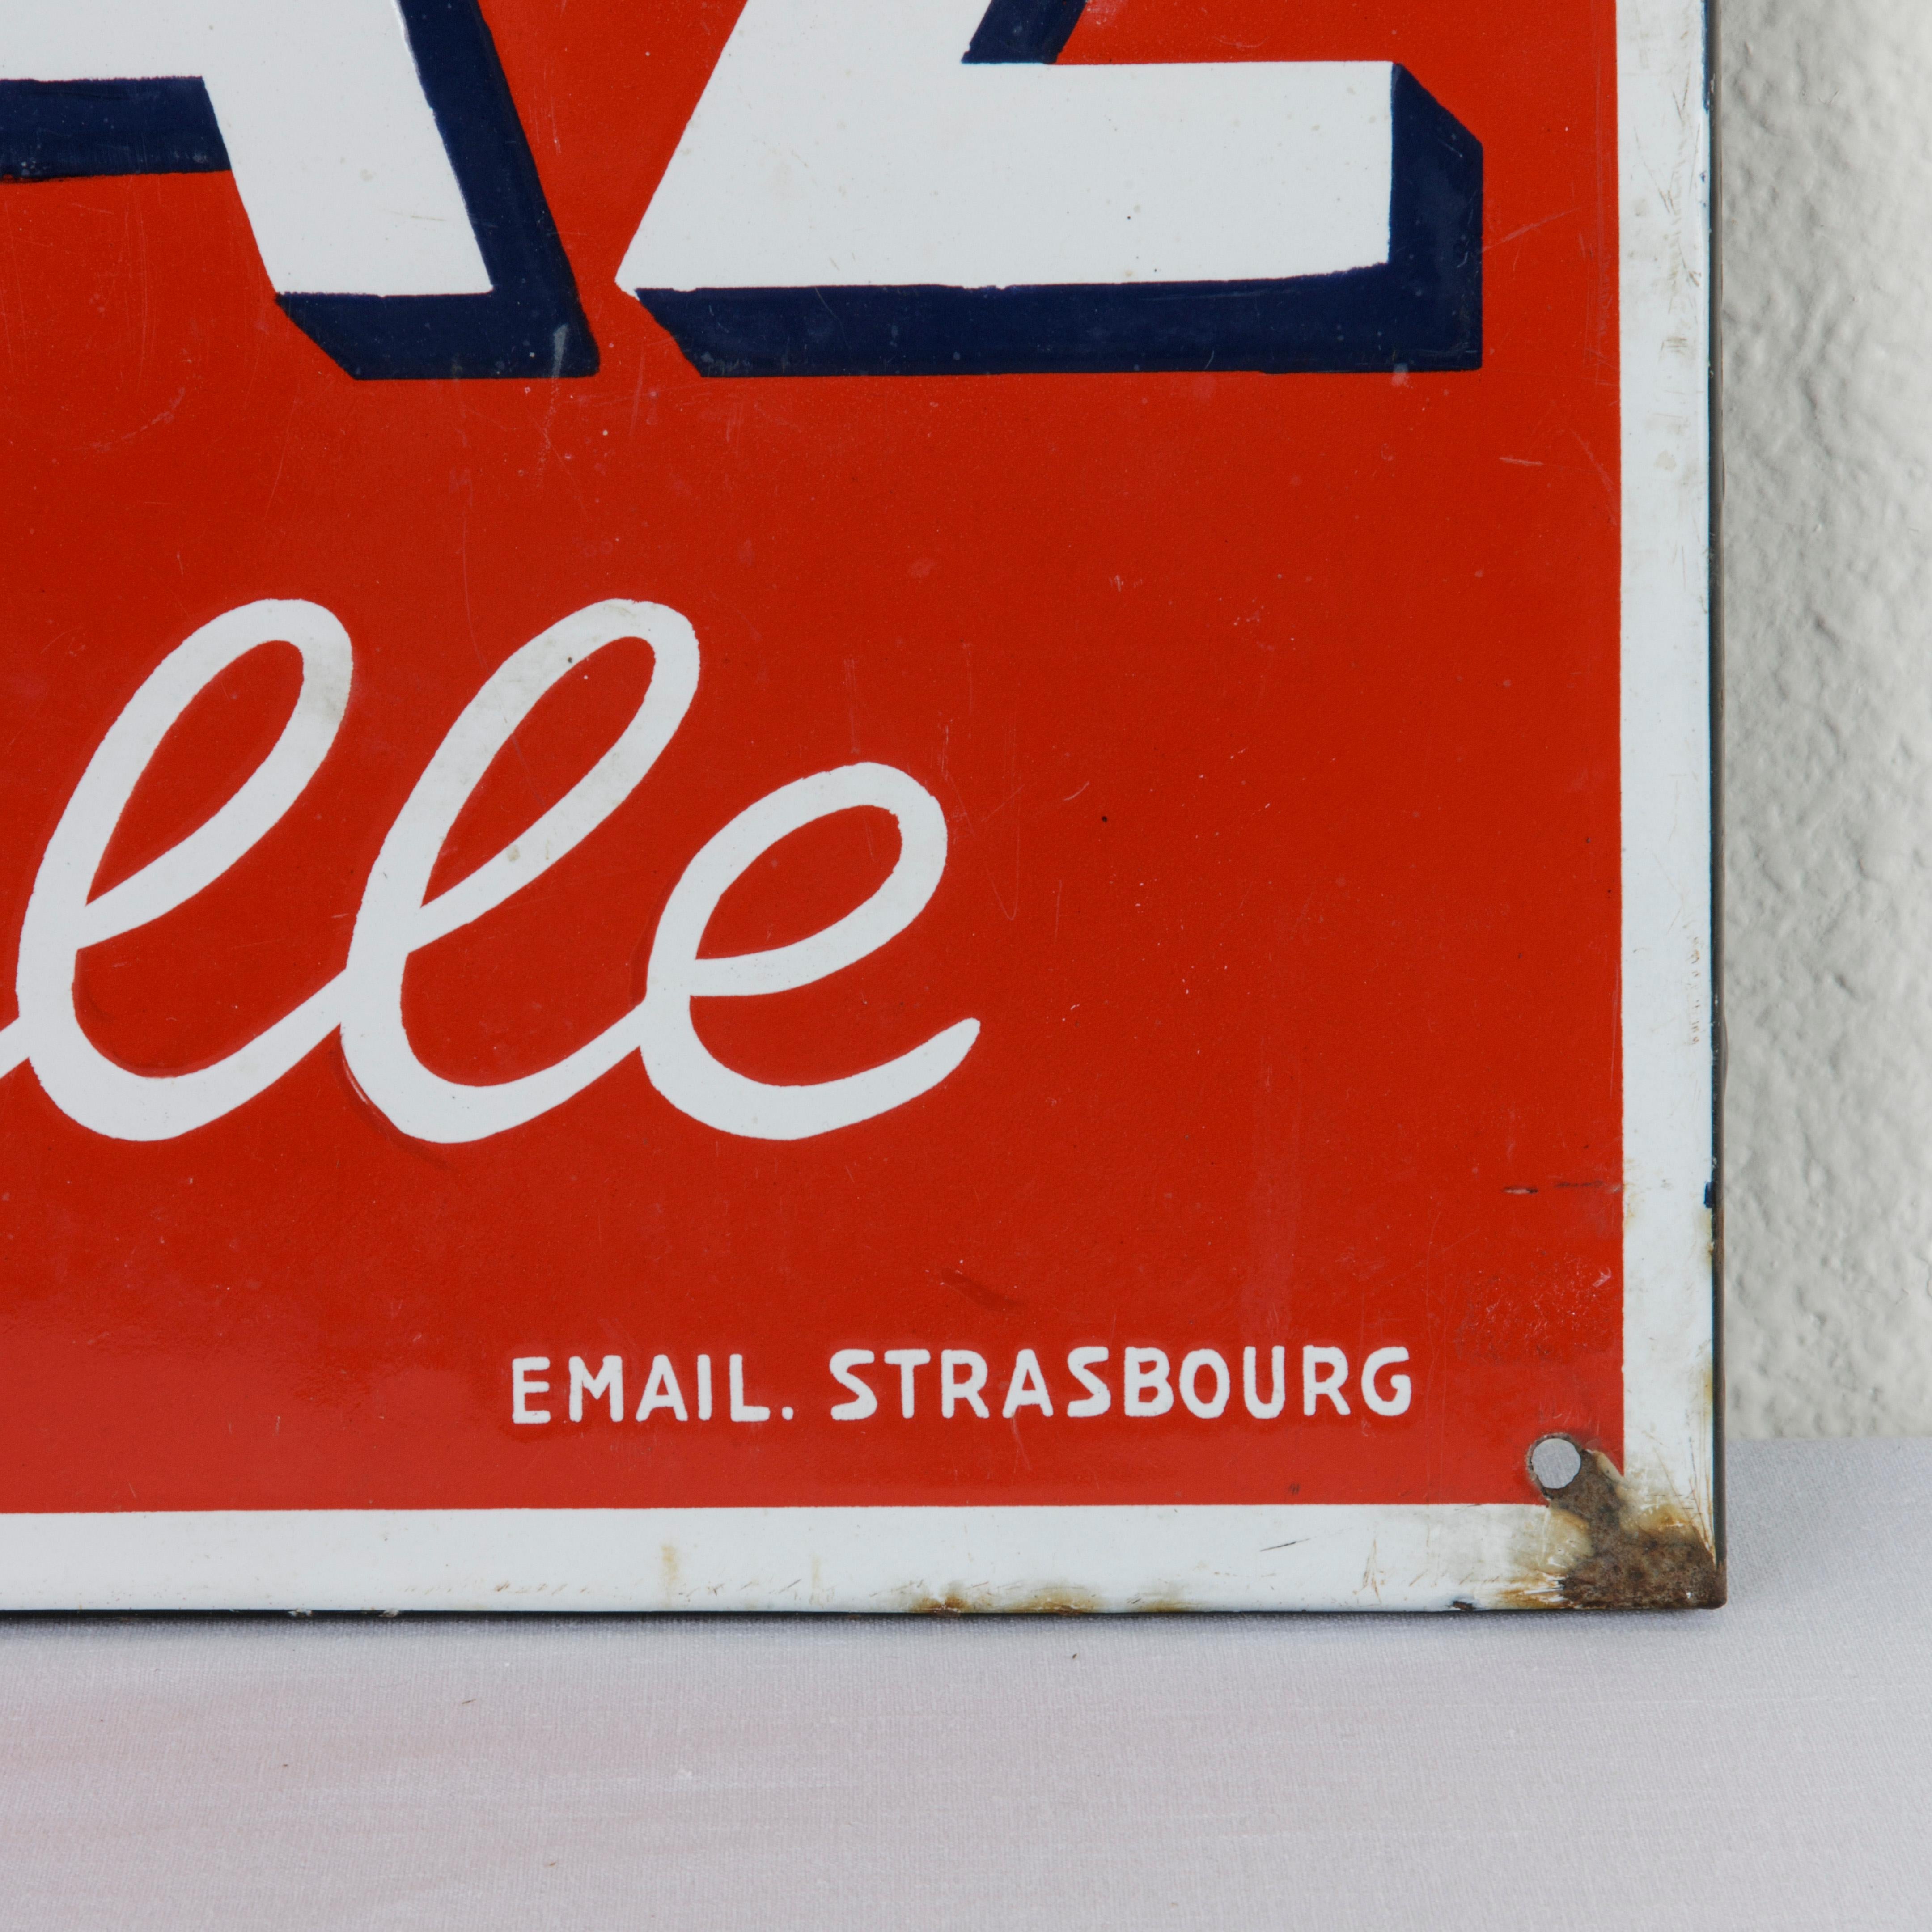 Measuring 14.5 inches high and 38 inches long, this large French enameled metal sign advertises Primagaz, gaz en bouteille or in English, Propane, gas in a bottle. Marked email Strasbourg (enamel from Strasbourg, France) and En vente ici (Sold